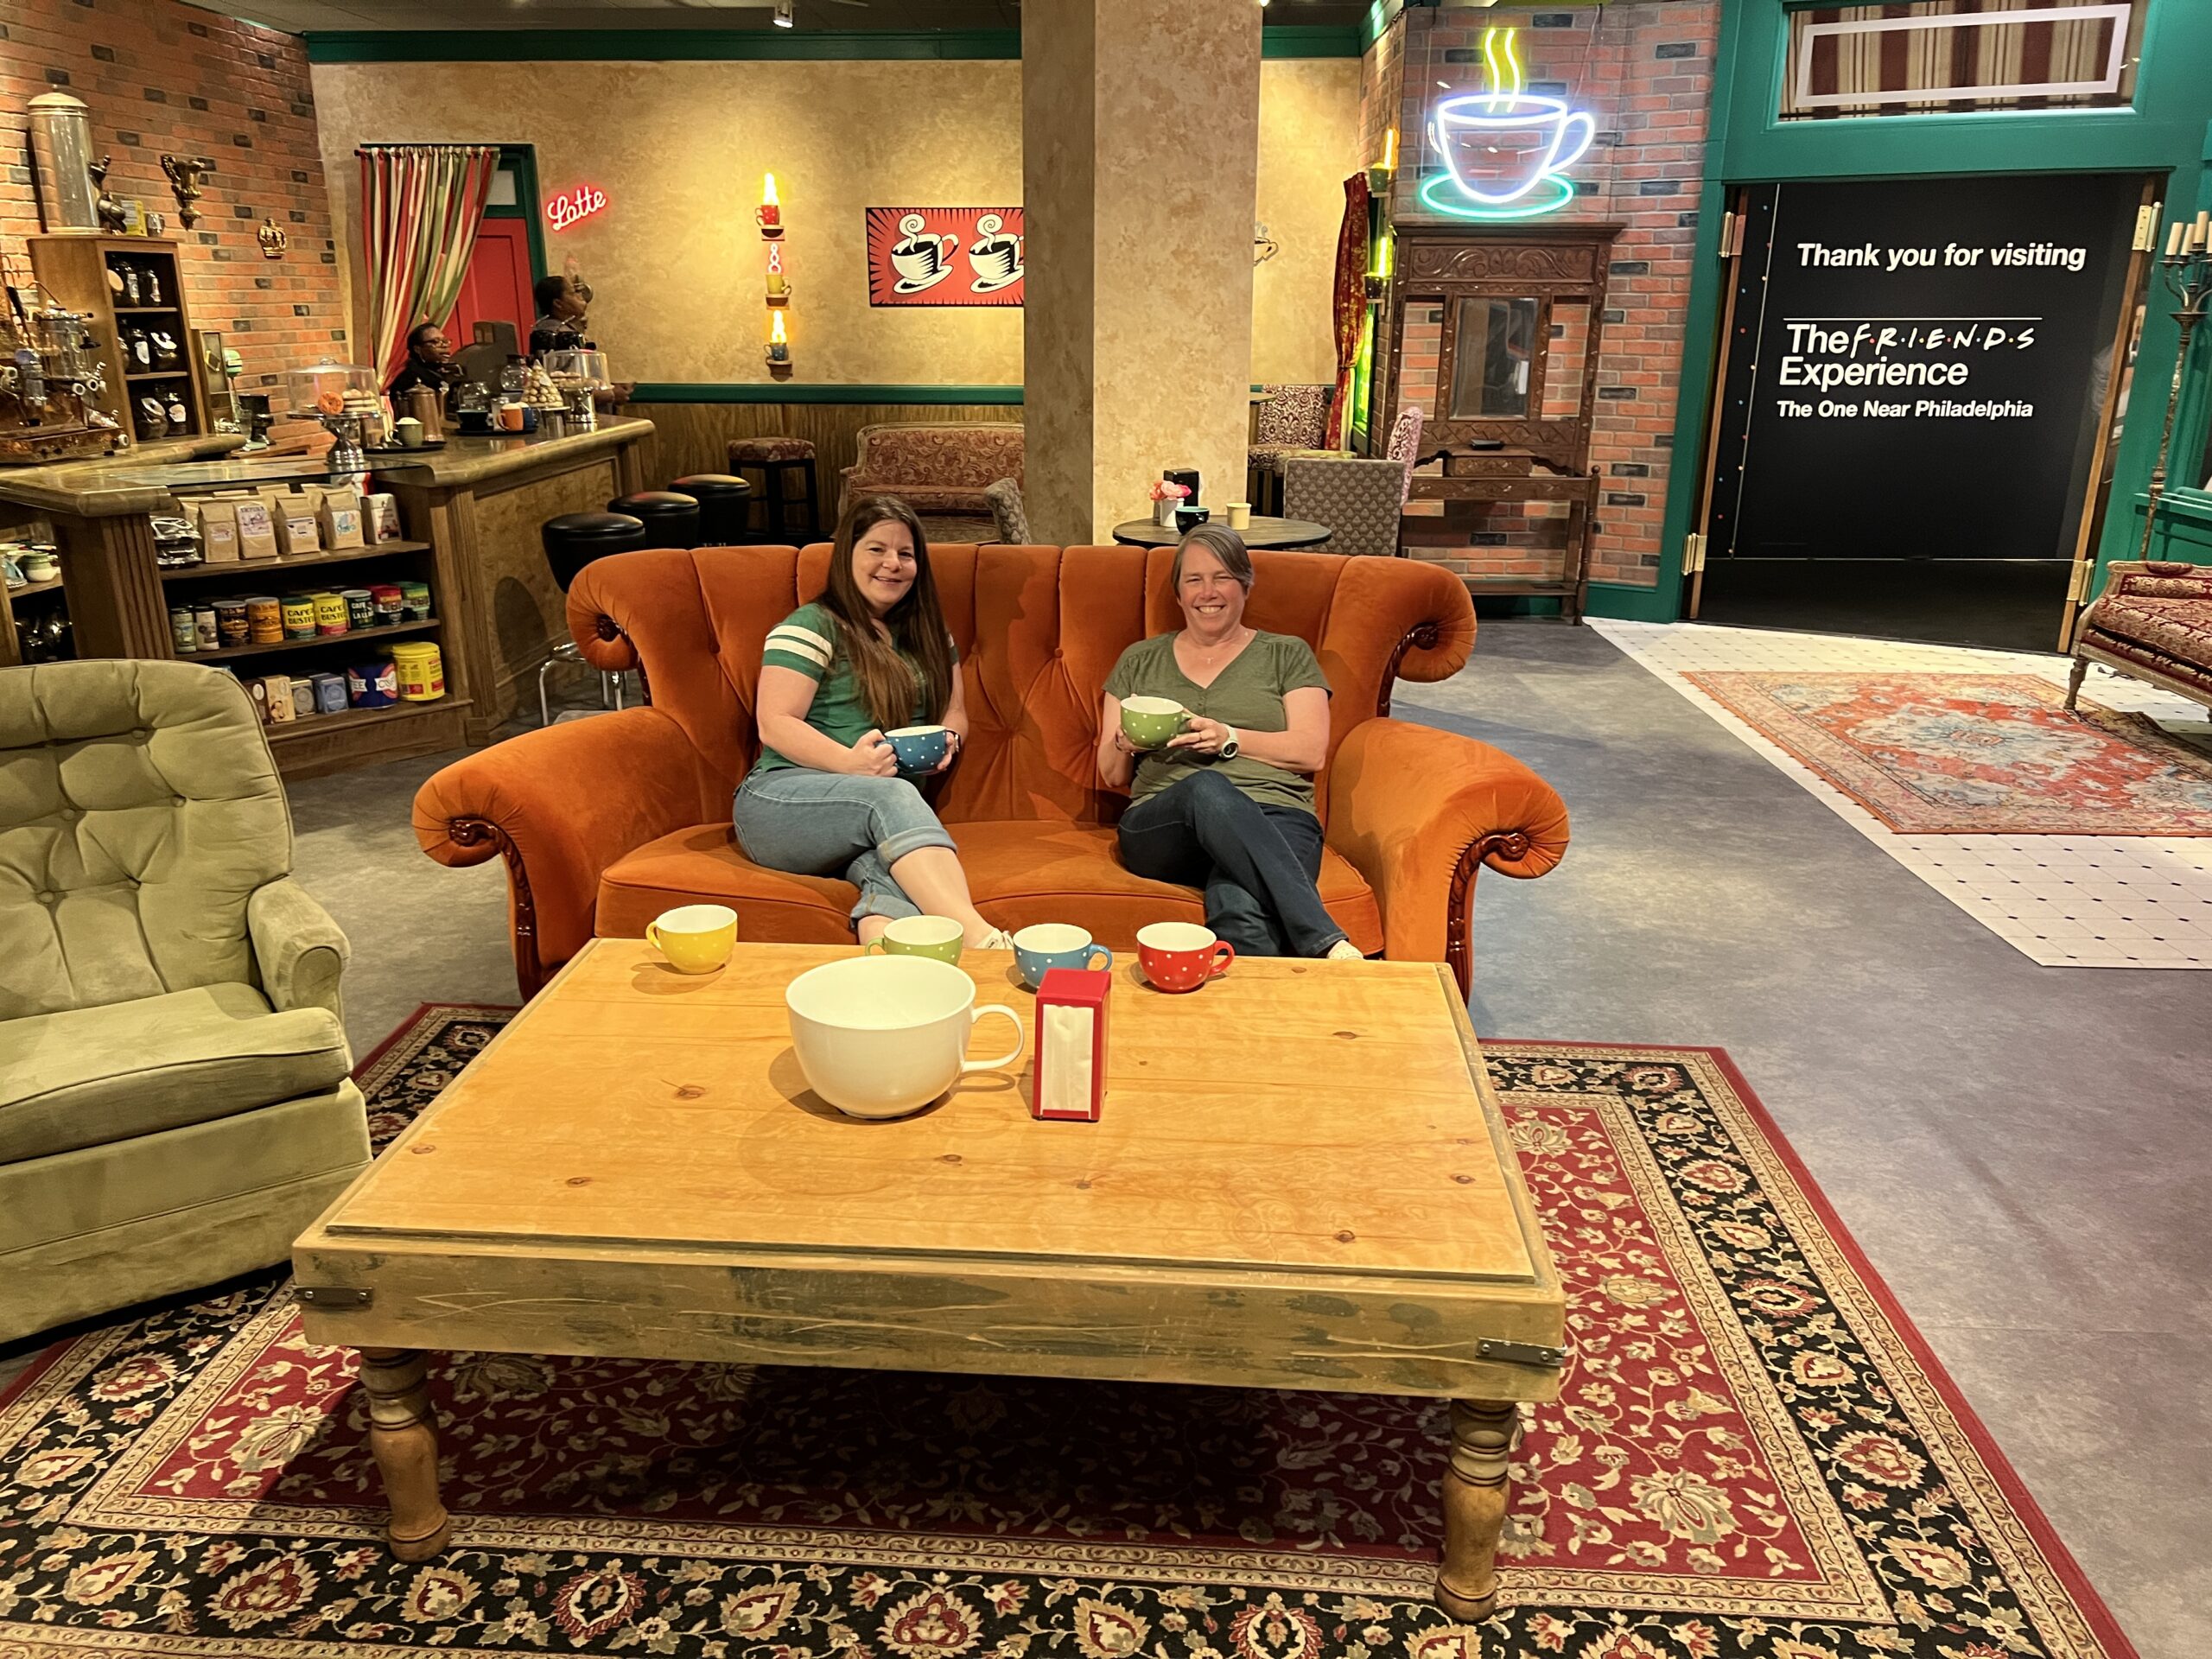 Kathy and Jenn at Central Perk on Orange Couch with Coffee mugs nonbranded image at The Friends Experience Near Philadelphia